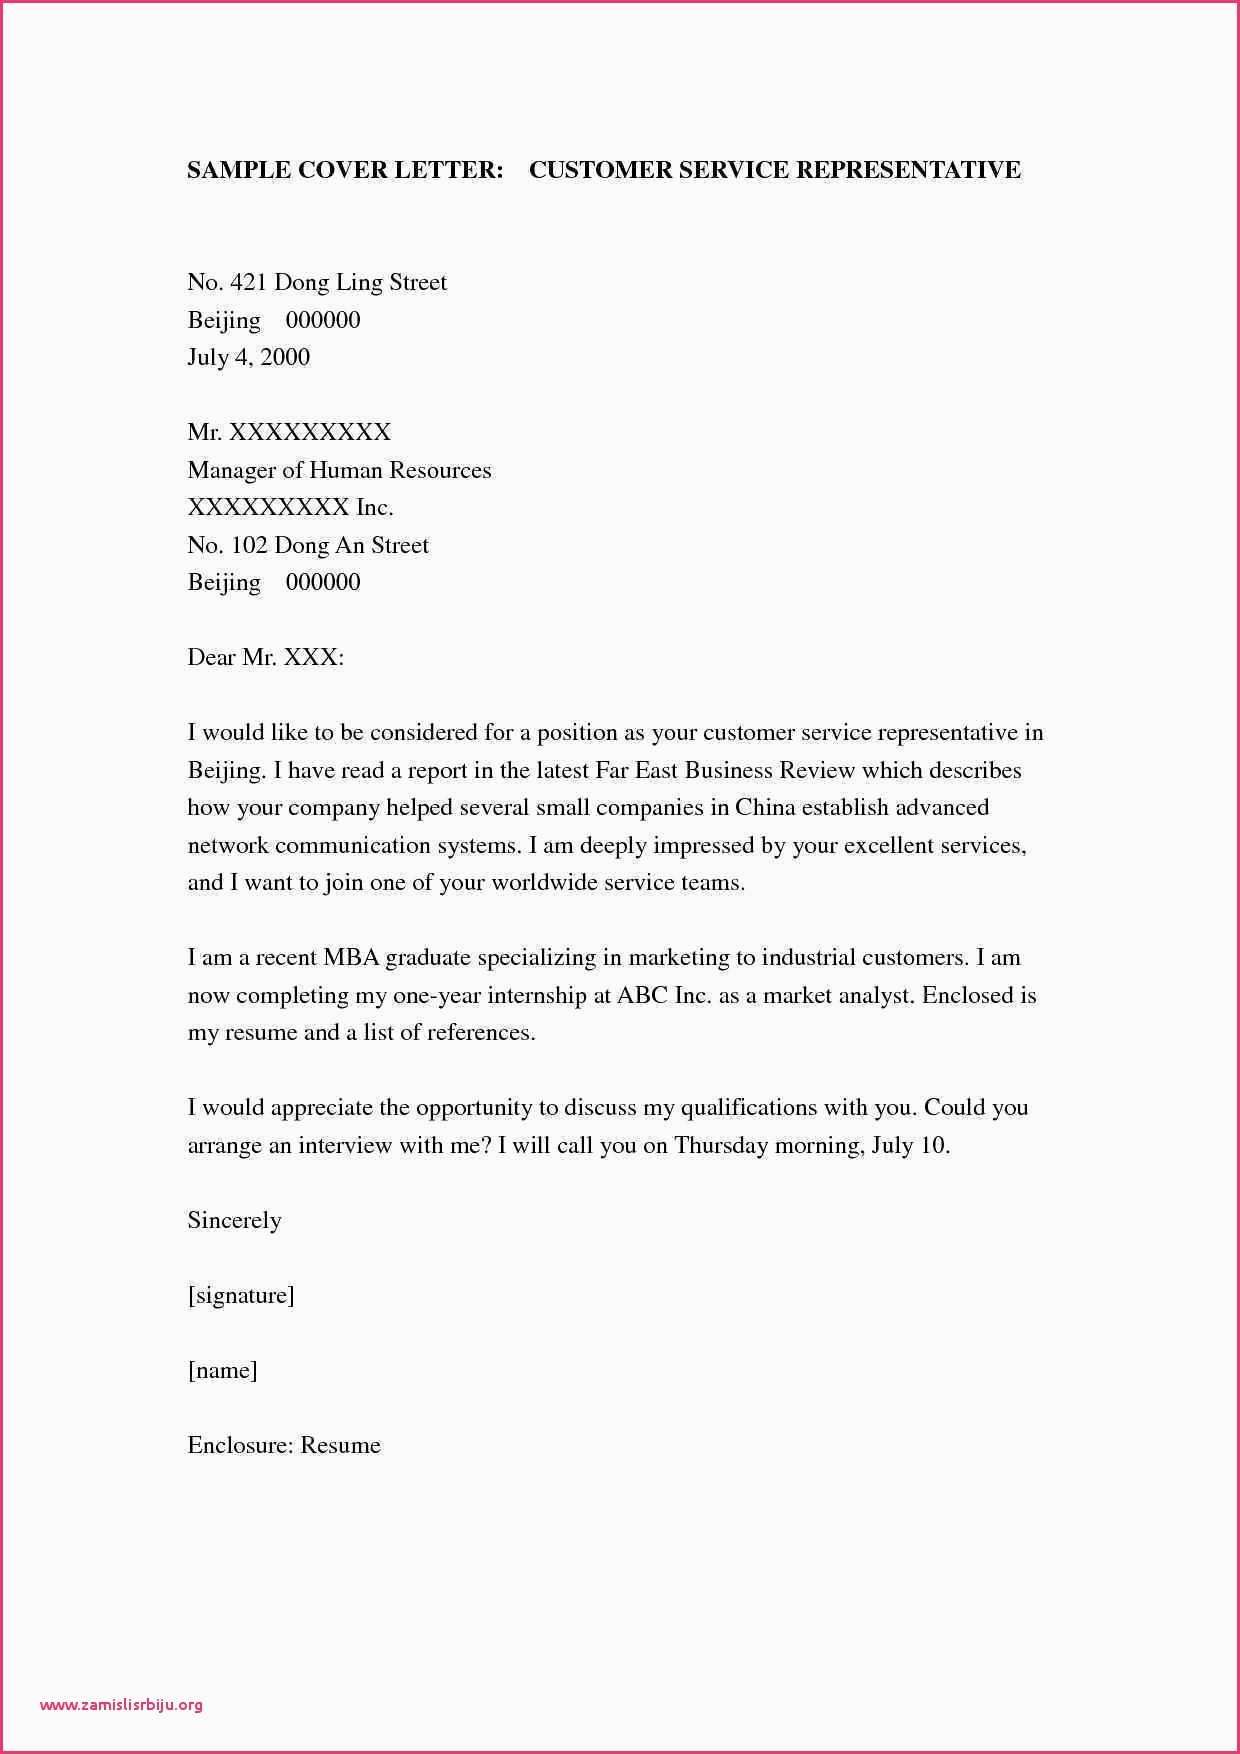 Customer Service Cover Letter Examples 2020